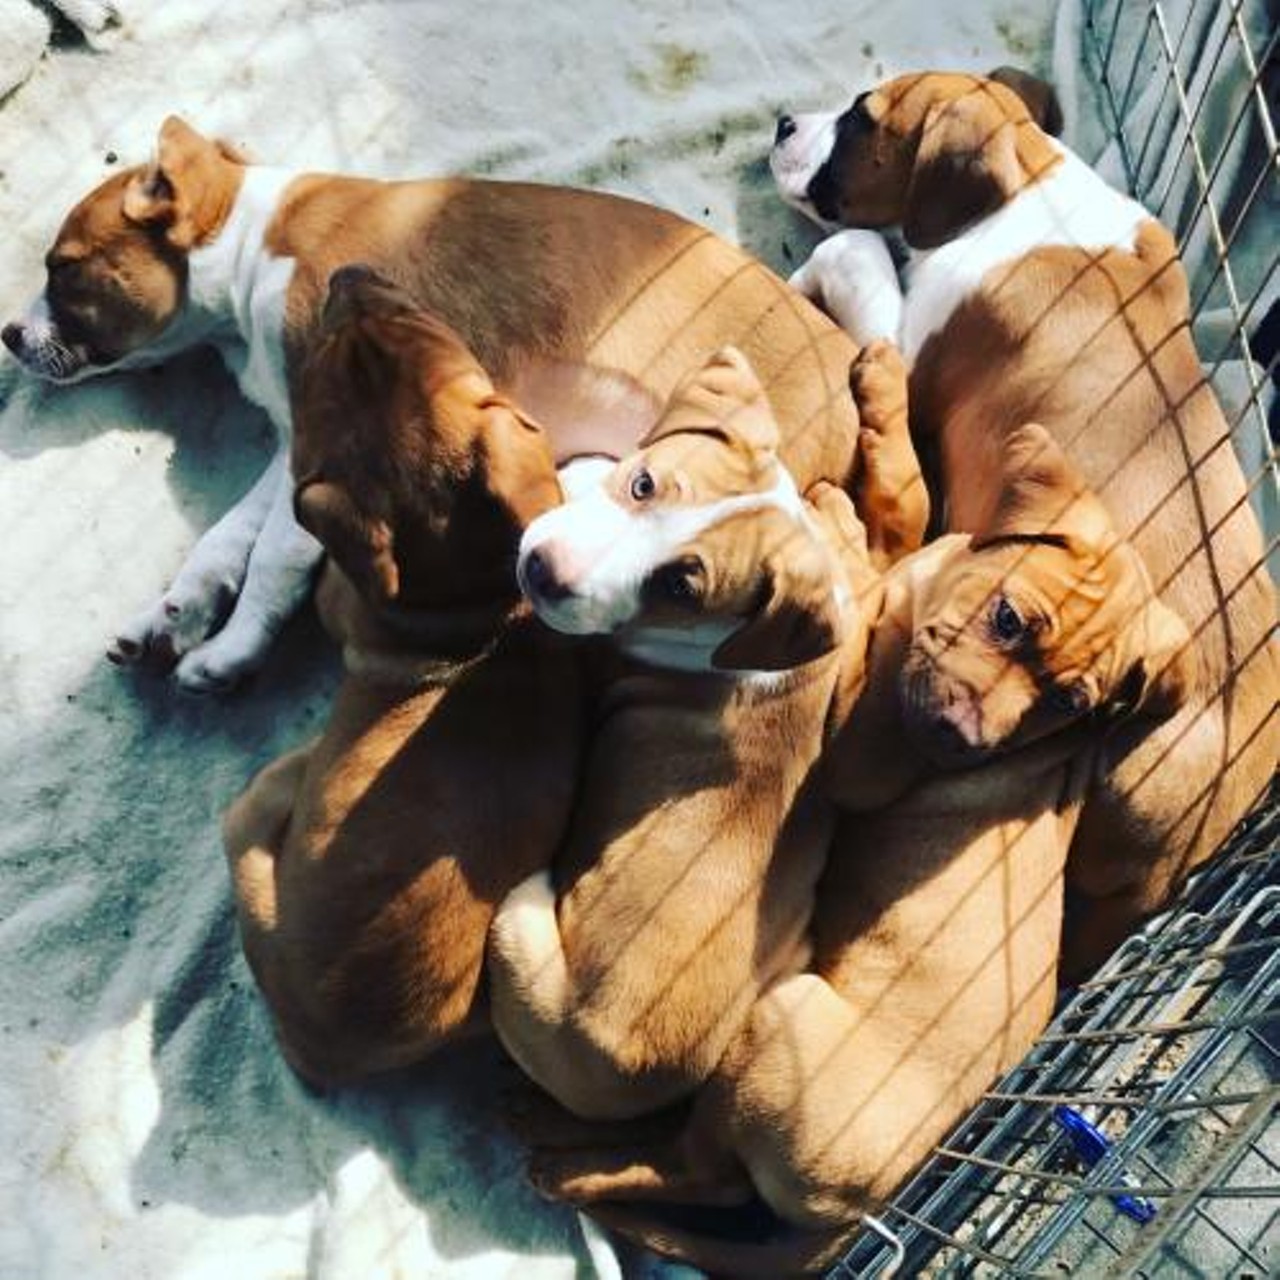  Bronx, Harlem, Brooklyn, Astoria and Chelsea
3-months old, Litter of Dogue de Bordeaux puppies 